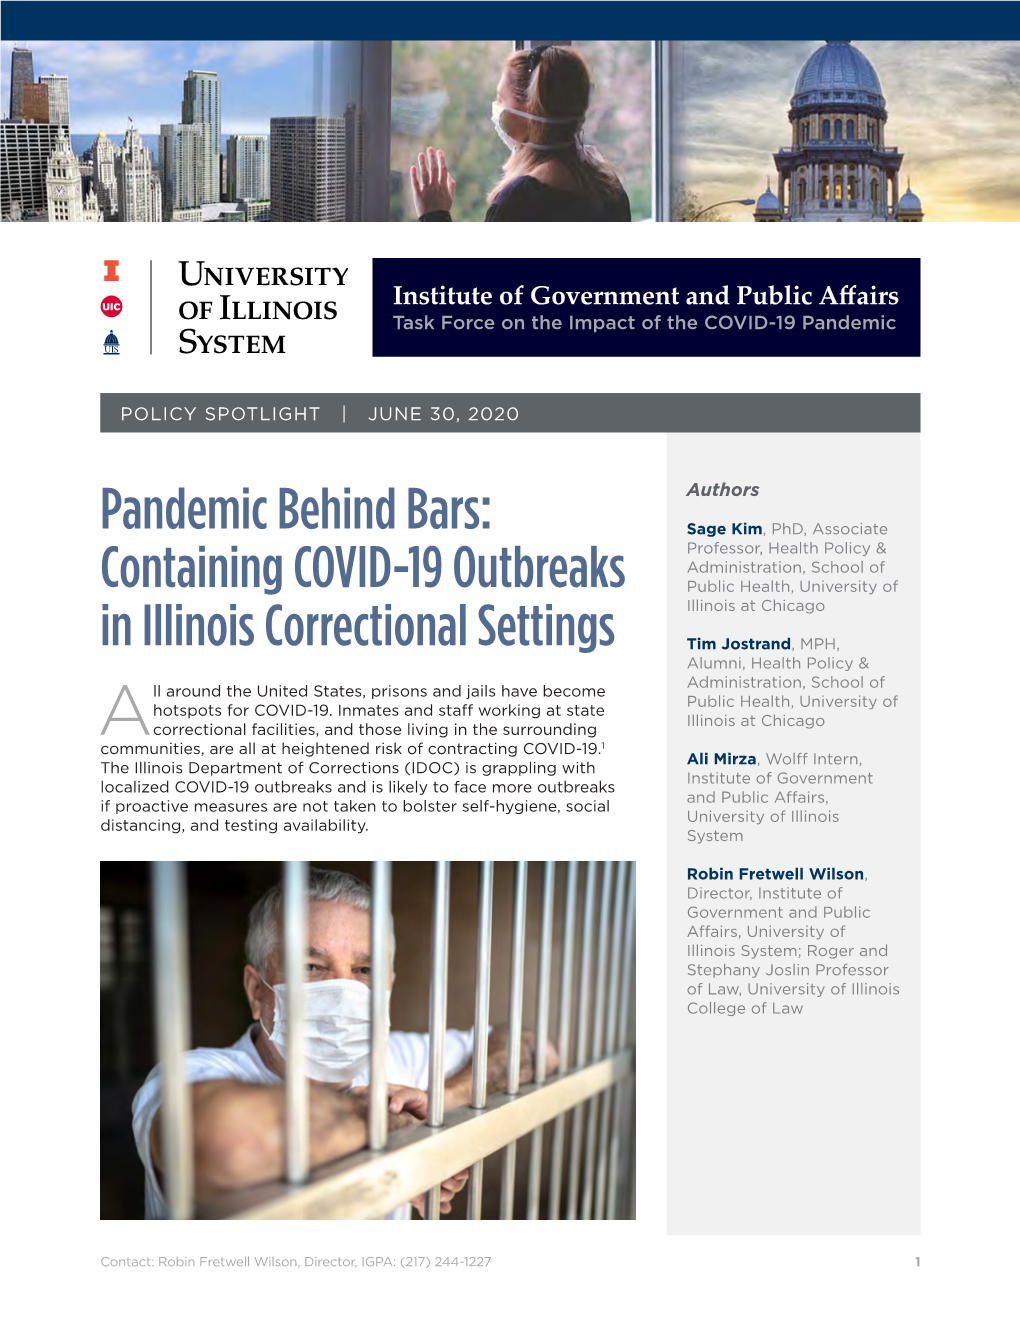 Containing COVID-19 Outbreaks in Illinois Correctional Settings